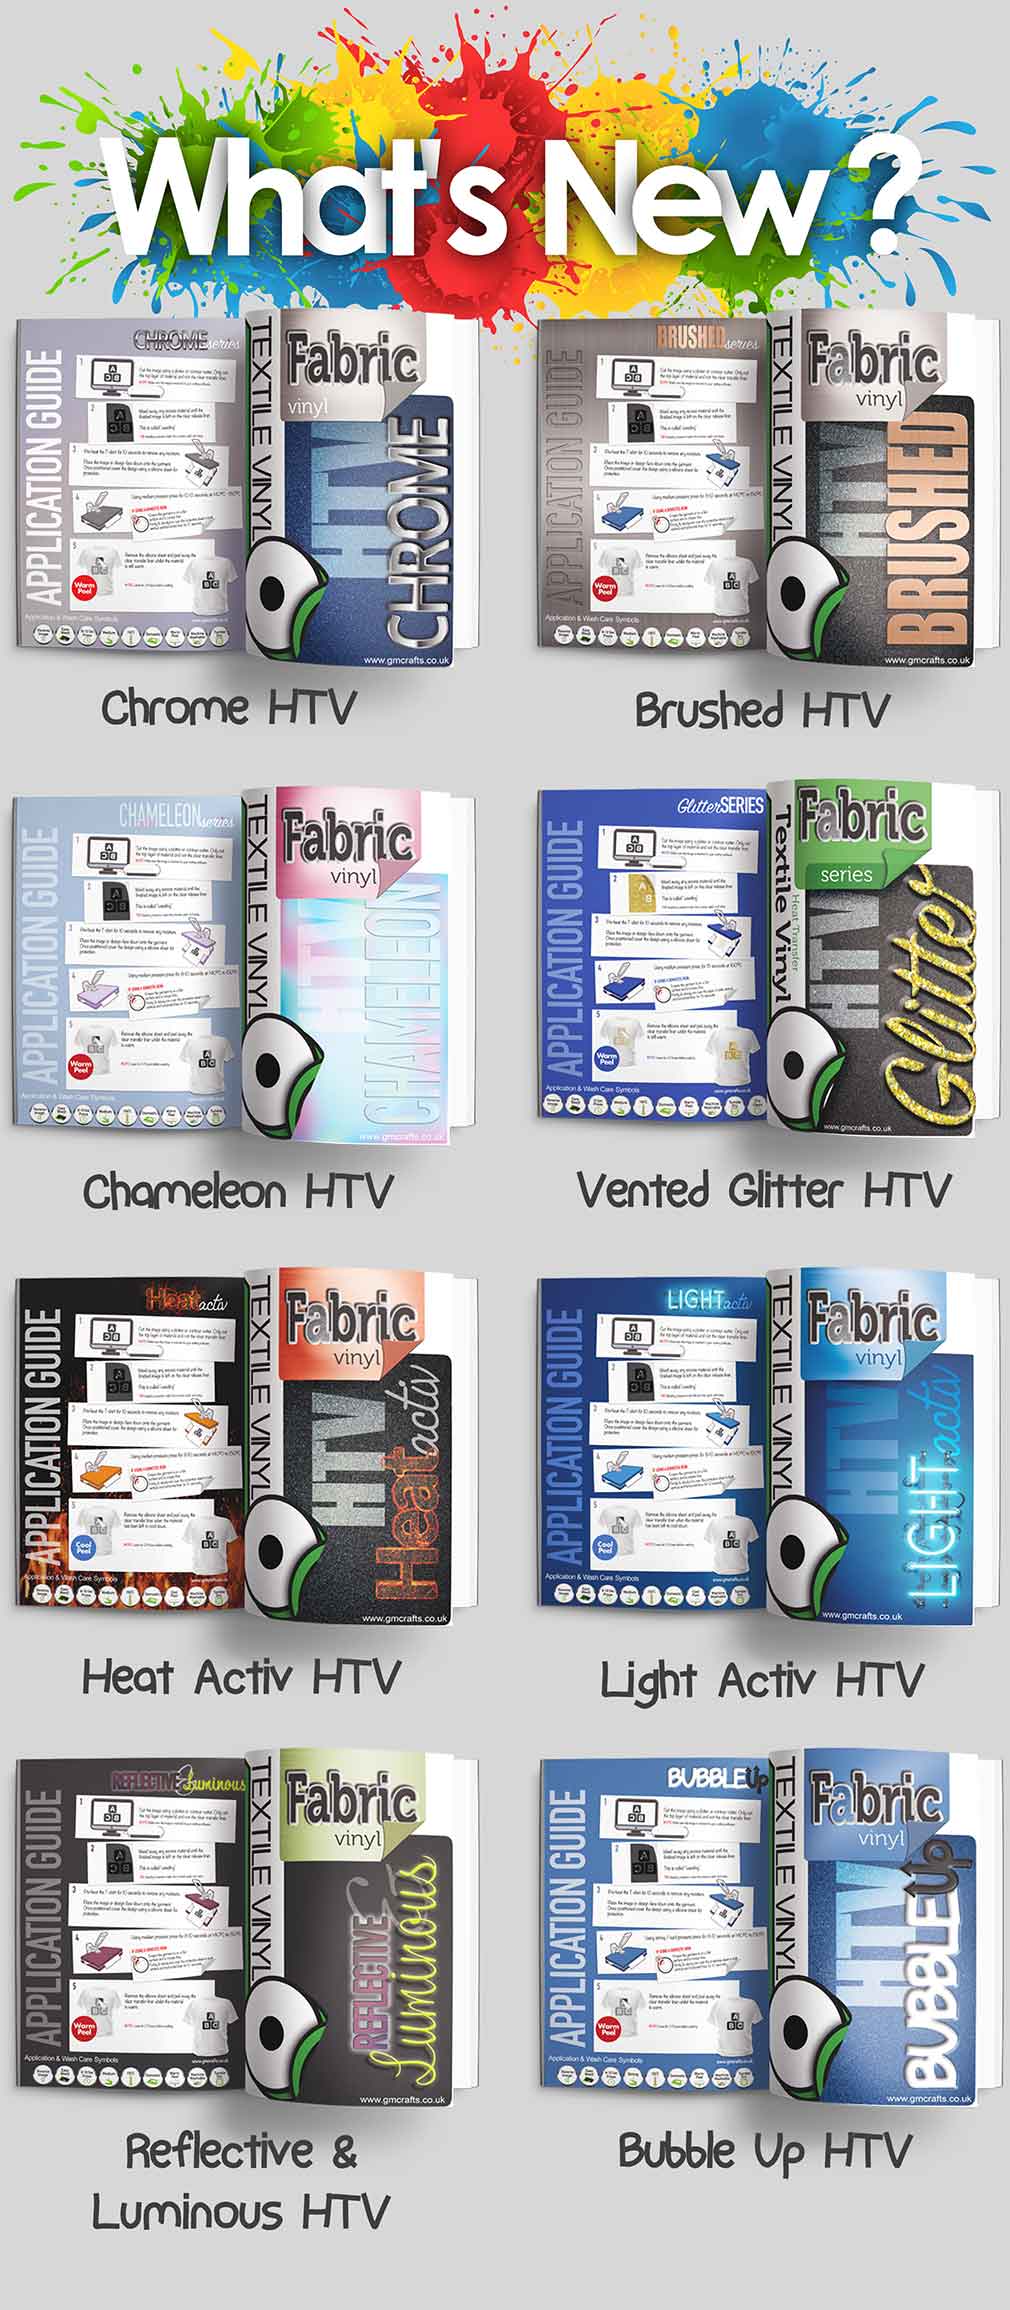 Mobile-New-HTV-Products-Nov-19